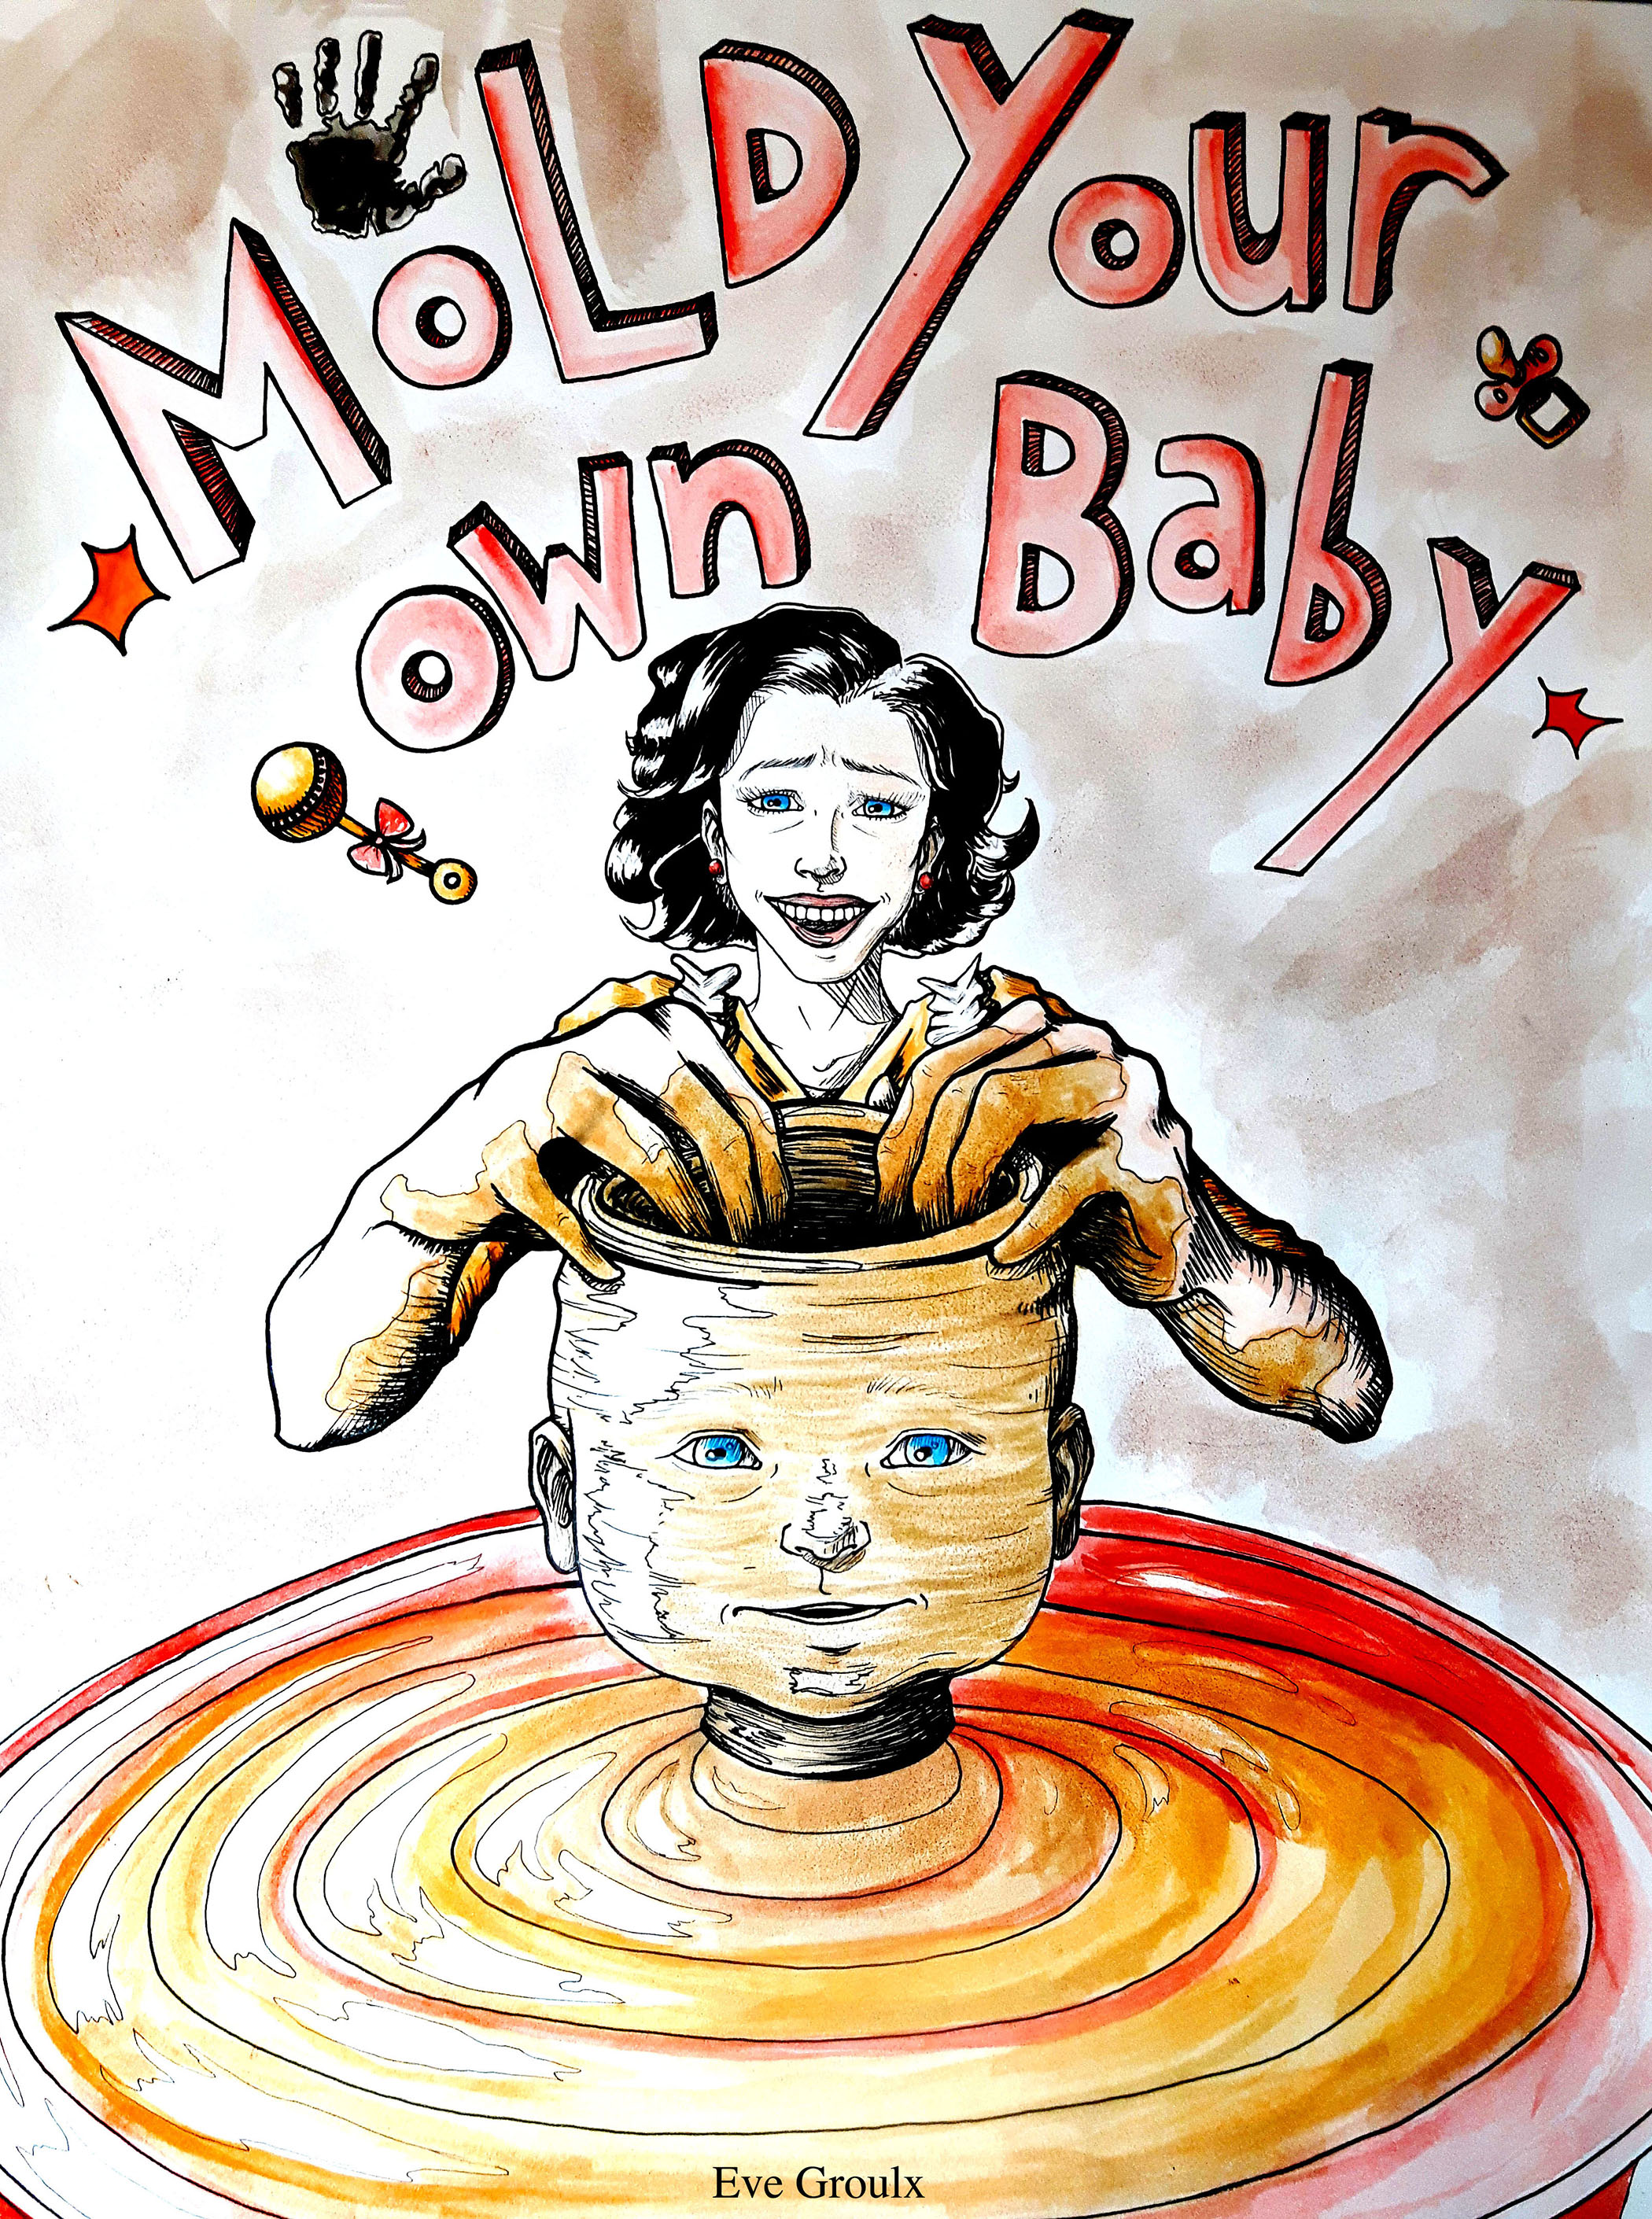 Mold Your Own Baby